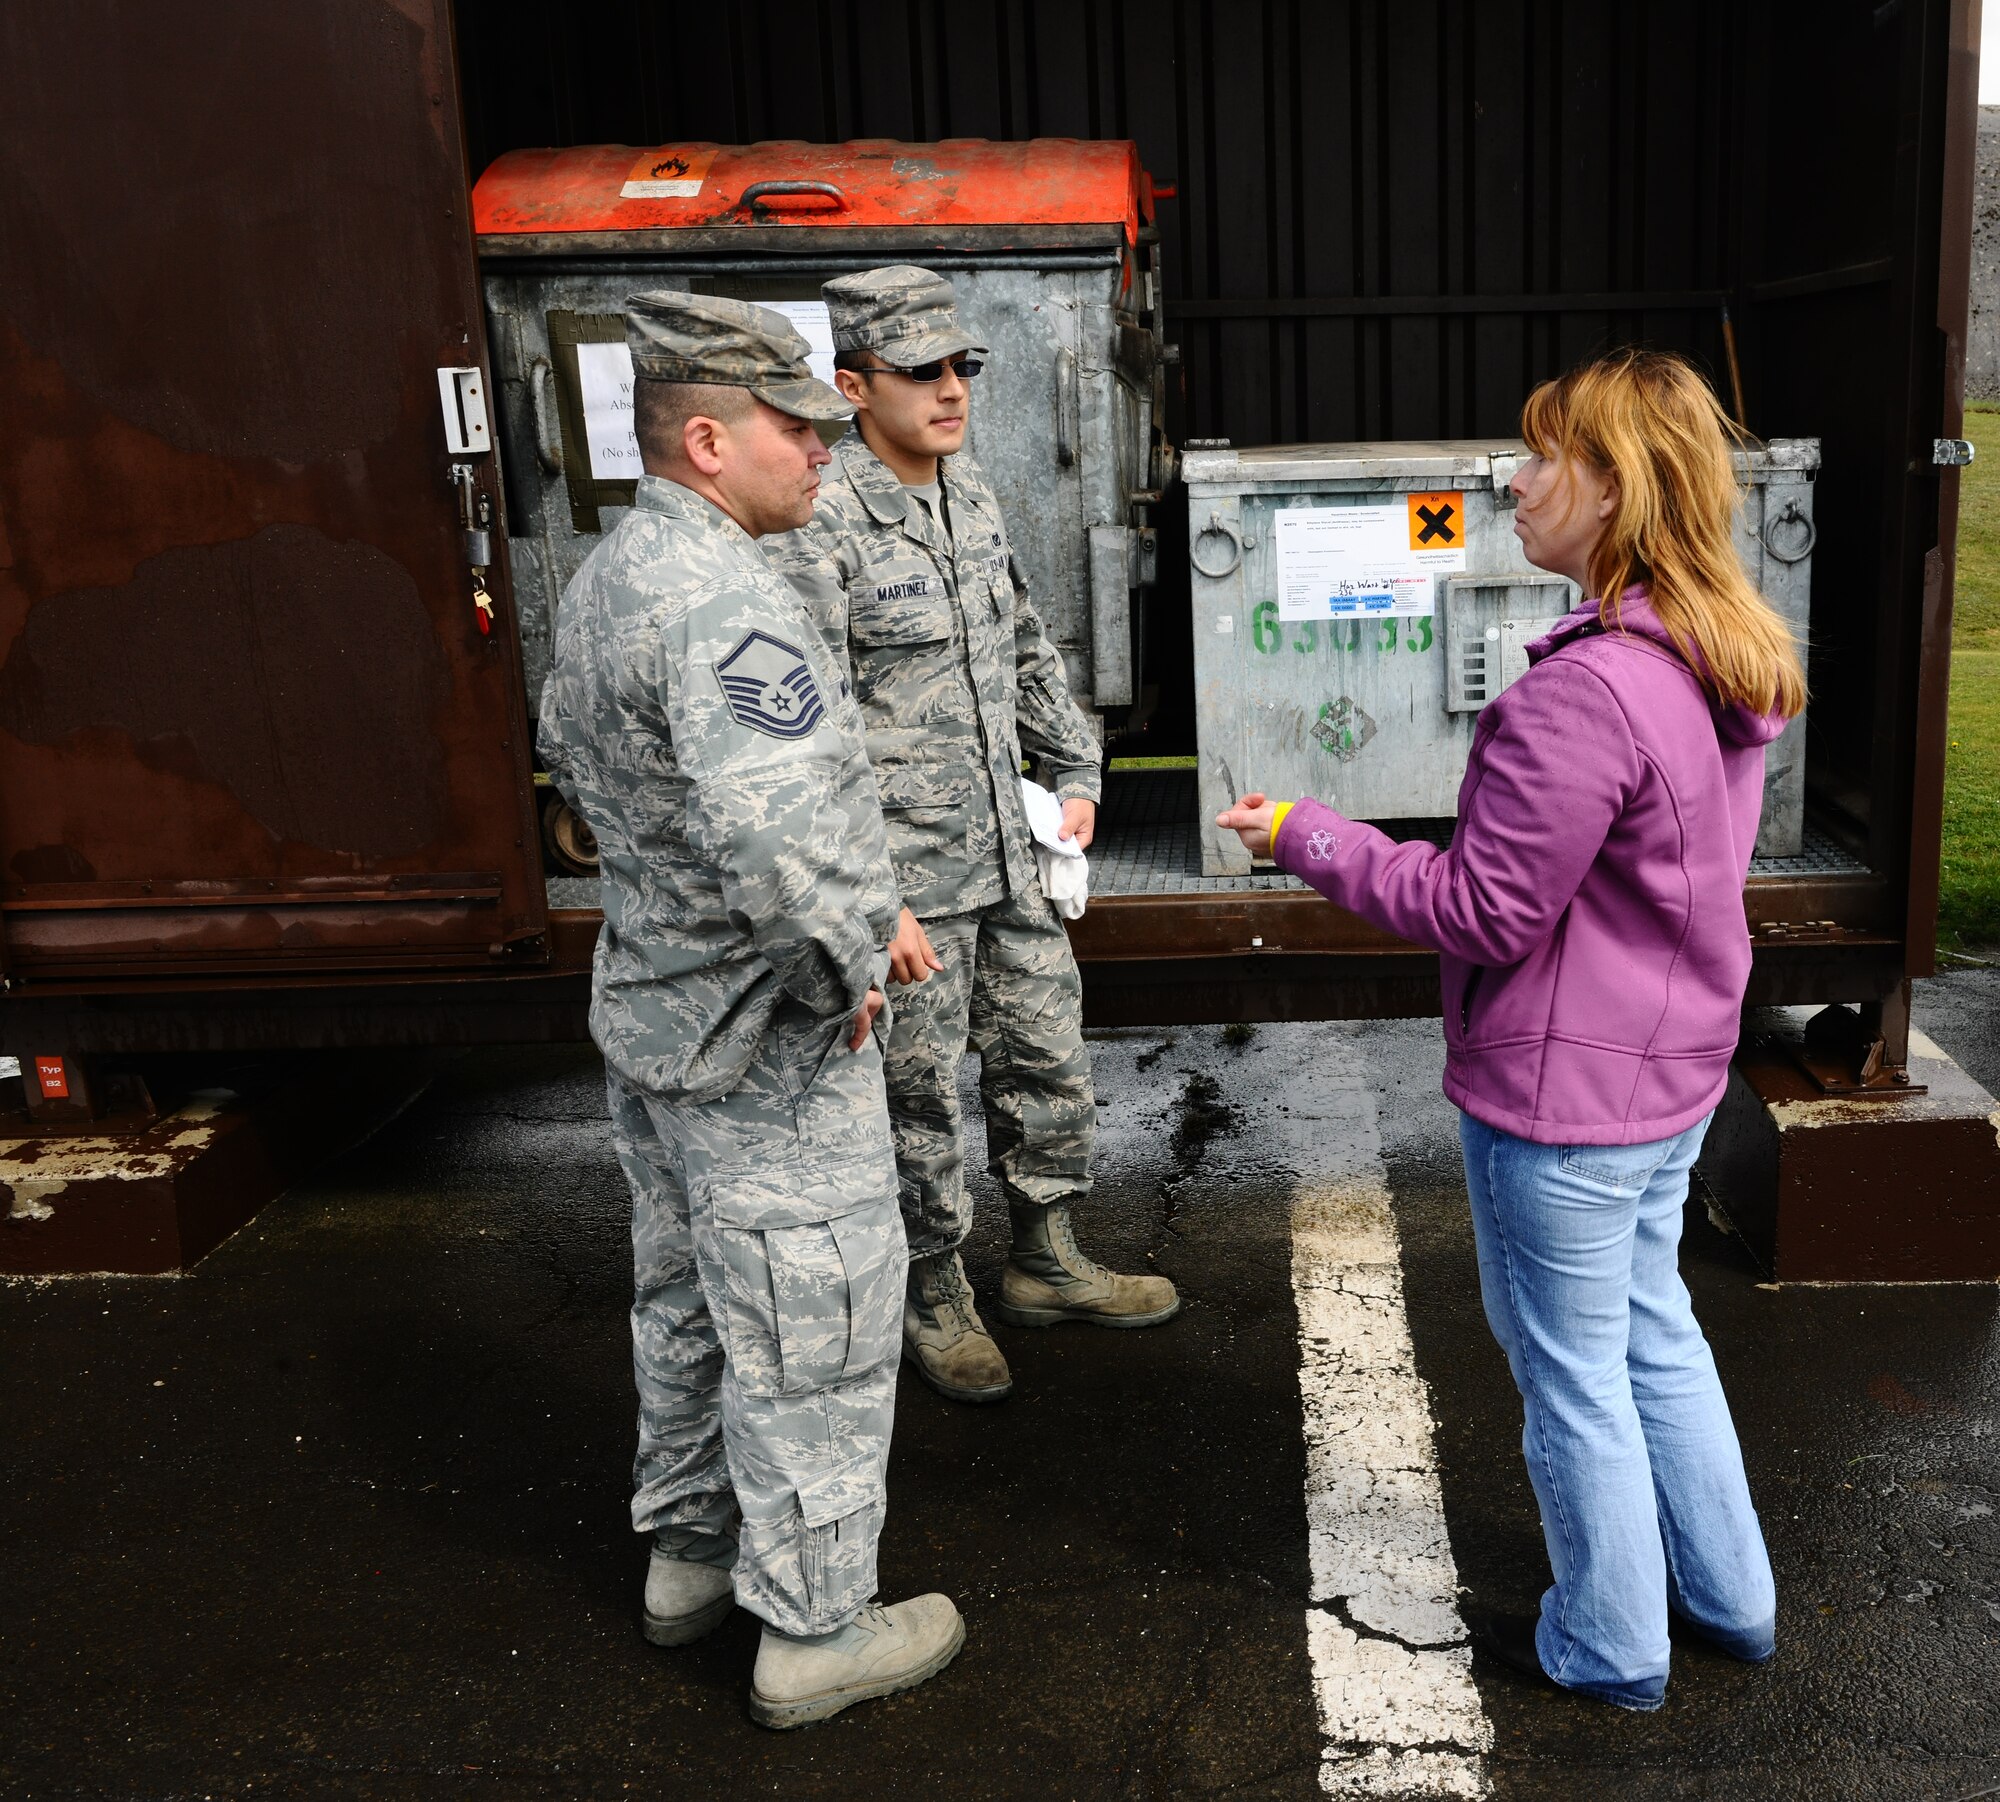 SPANGDAHLEM AIR BASE, Germany – Left to right, Master Sgt. Thomas McGrew and Staff Sgt. Jesus Martinez, 52nd Civil Engineer Squadron power production technicians, and Steffanie Metzger, U.S. Air Forces in Europe hazardous materials and waste manager, talk about proper labeling and upkeep of secondary storage containers during an Environmental, Safety and Occupational Health Compliance Assessment Management Program evaluation outside the power productions building here April 18. The week-long ESOHCAMP assessment gives the base an idea of how its compares to U. S. Air Force and host-nation regulations regarding environmental and occupational safety. This team is made up of 15 USAFE evaluators who assess Spangdahlem AB’s overall health. The base uses the results from the program to help become USAFE’s most environmentally friendly wing. (U.S. Air Force photo by Airman 1st Class Dillon Davis/Released)